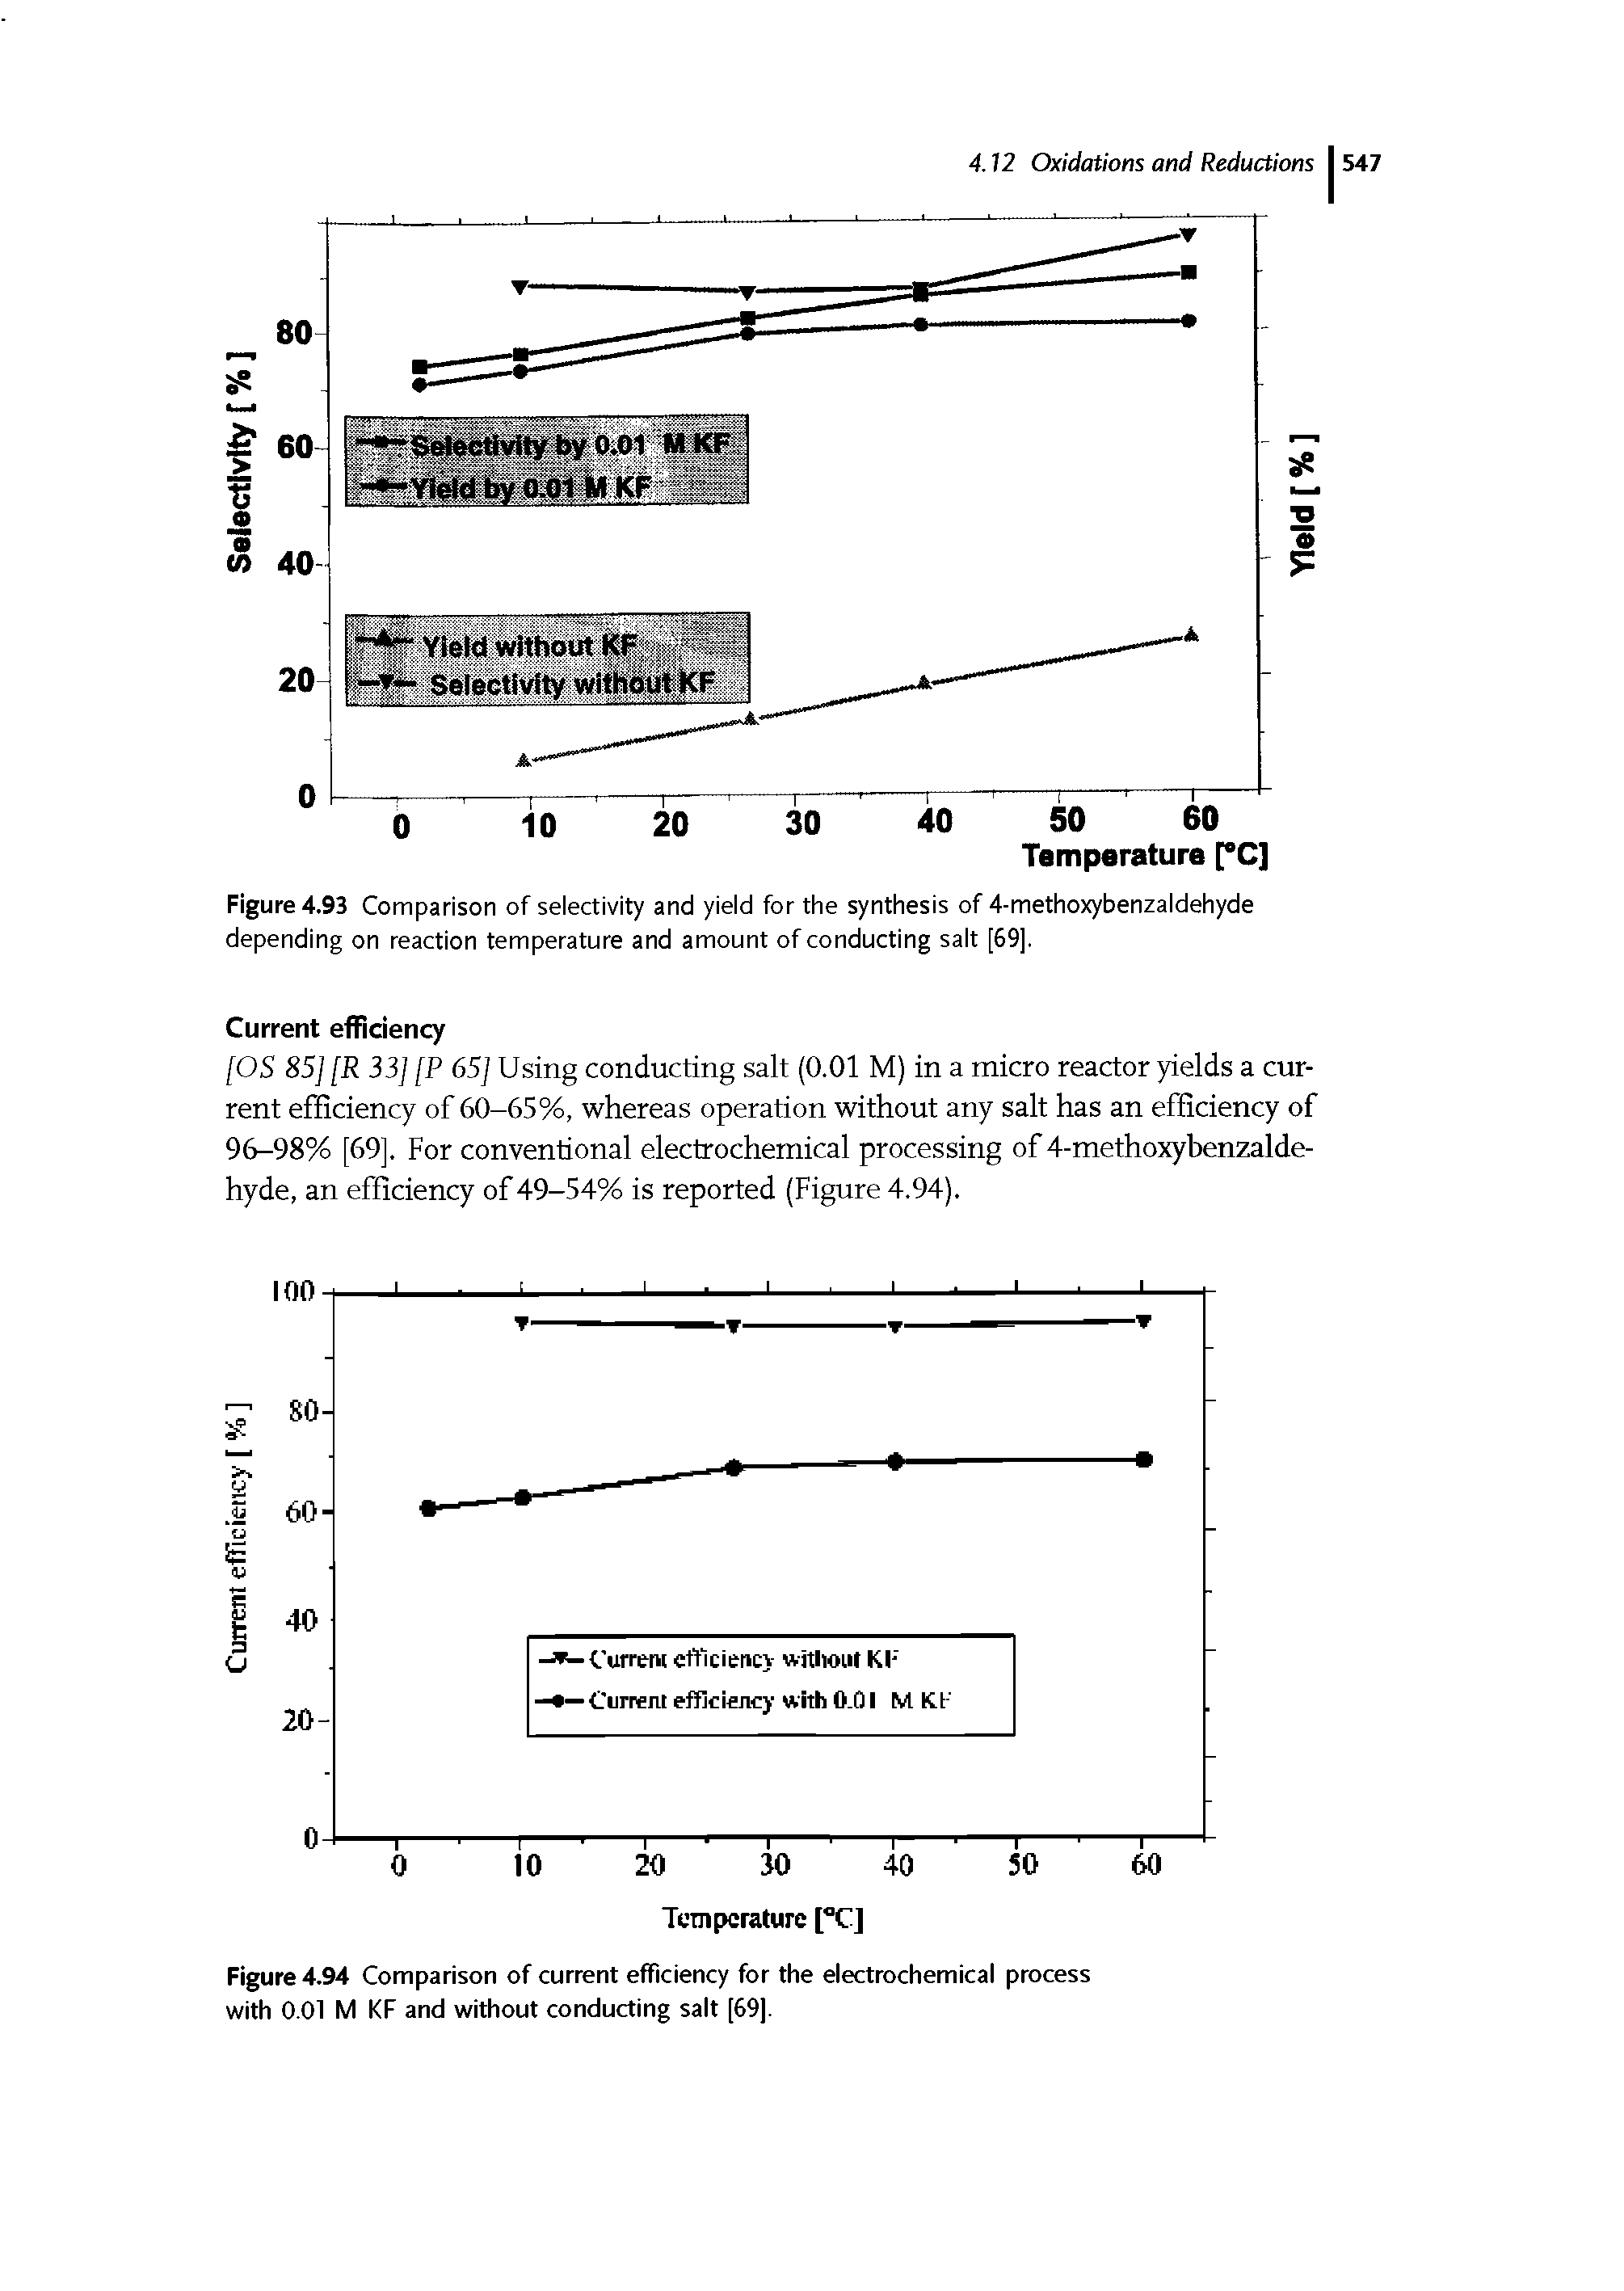 Figure 4.94 Comparison of current efficiency for the electrochemical process with 0.01 M KF and without conducting salt [69].